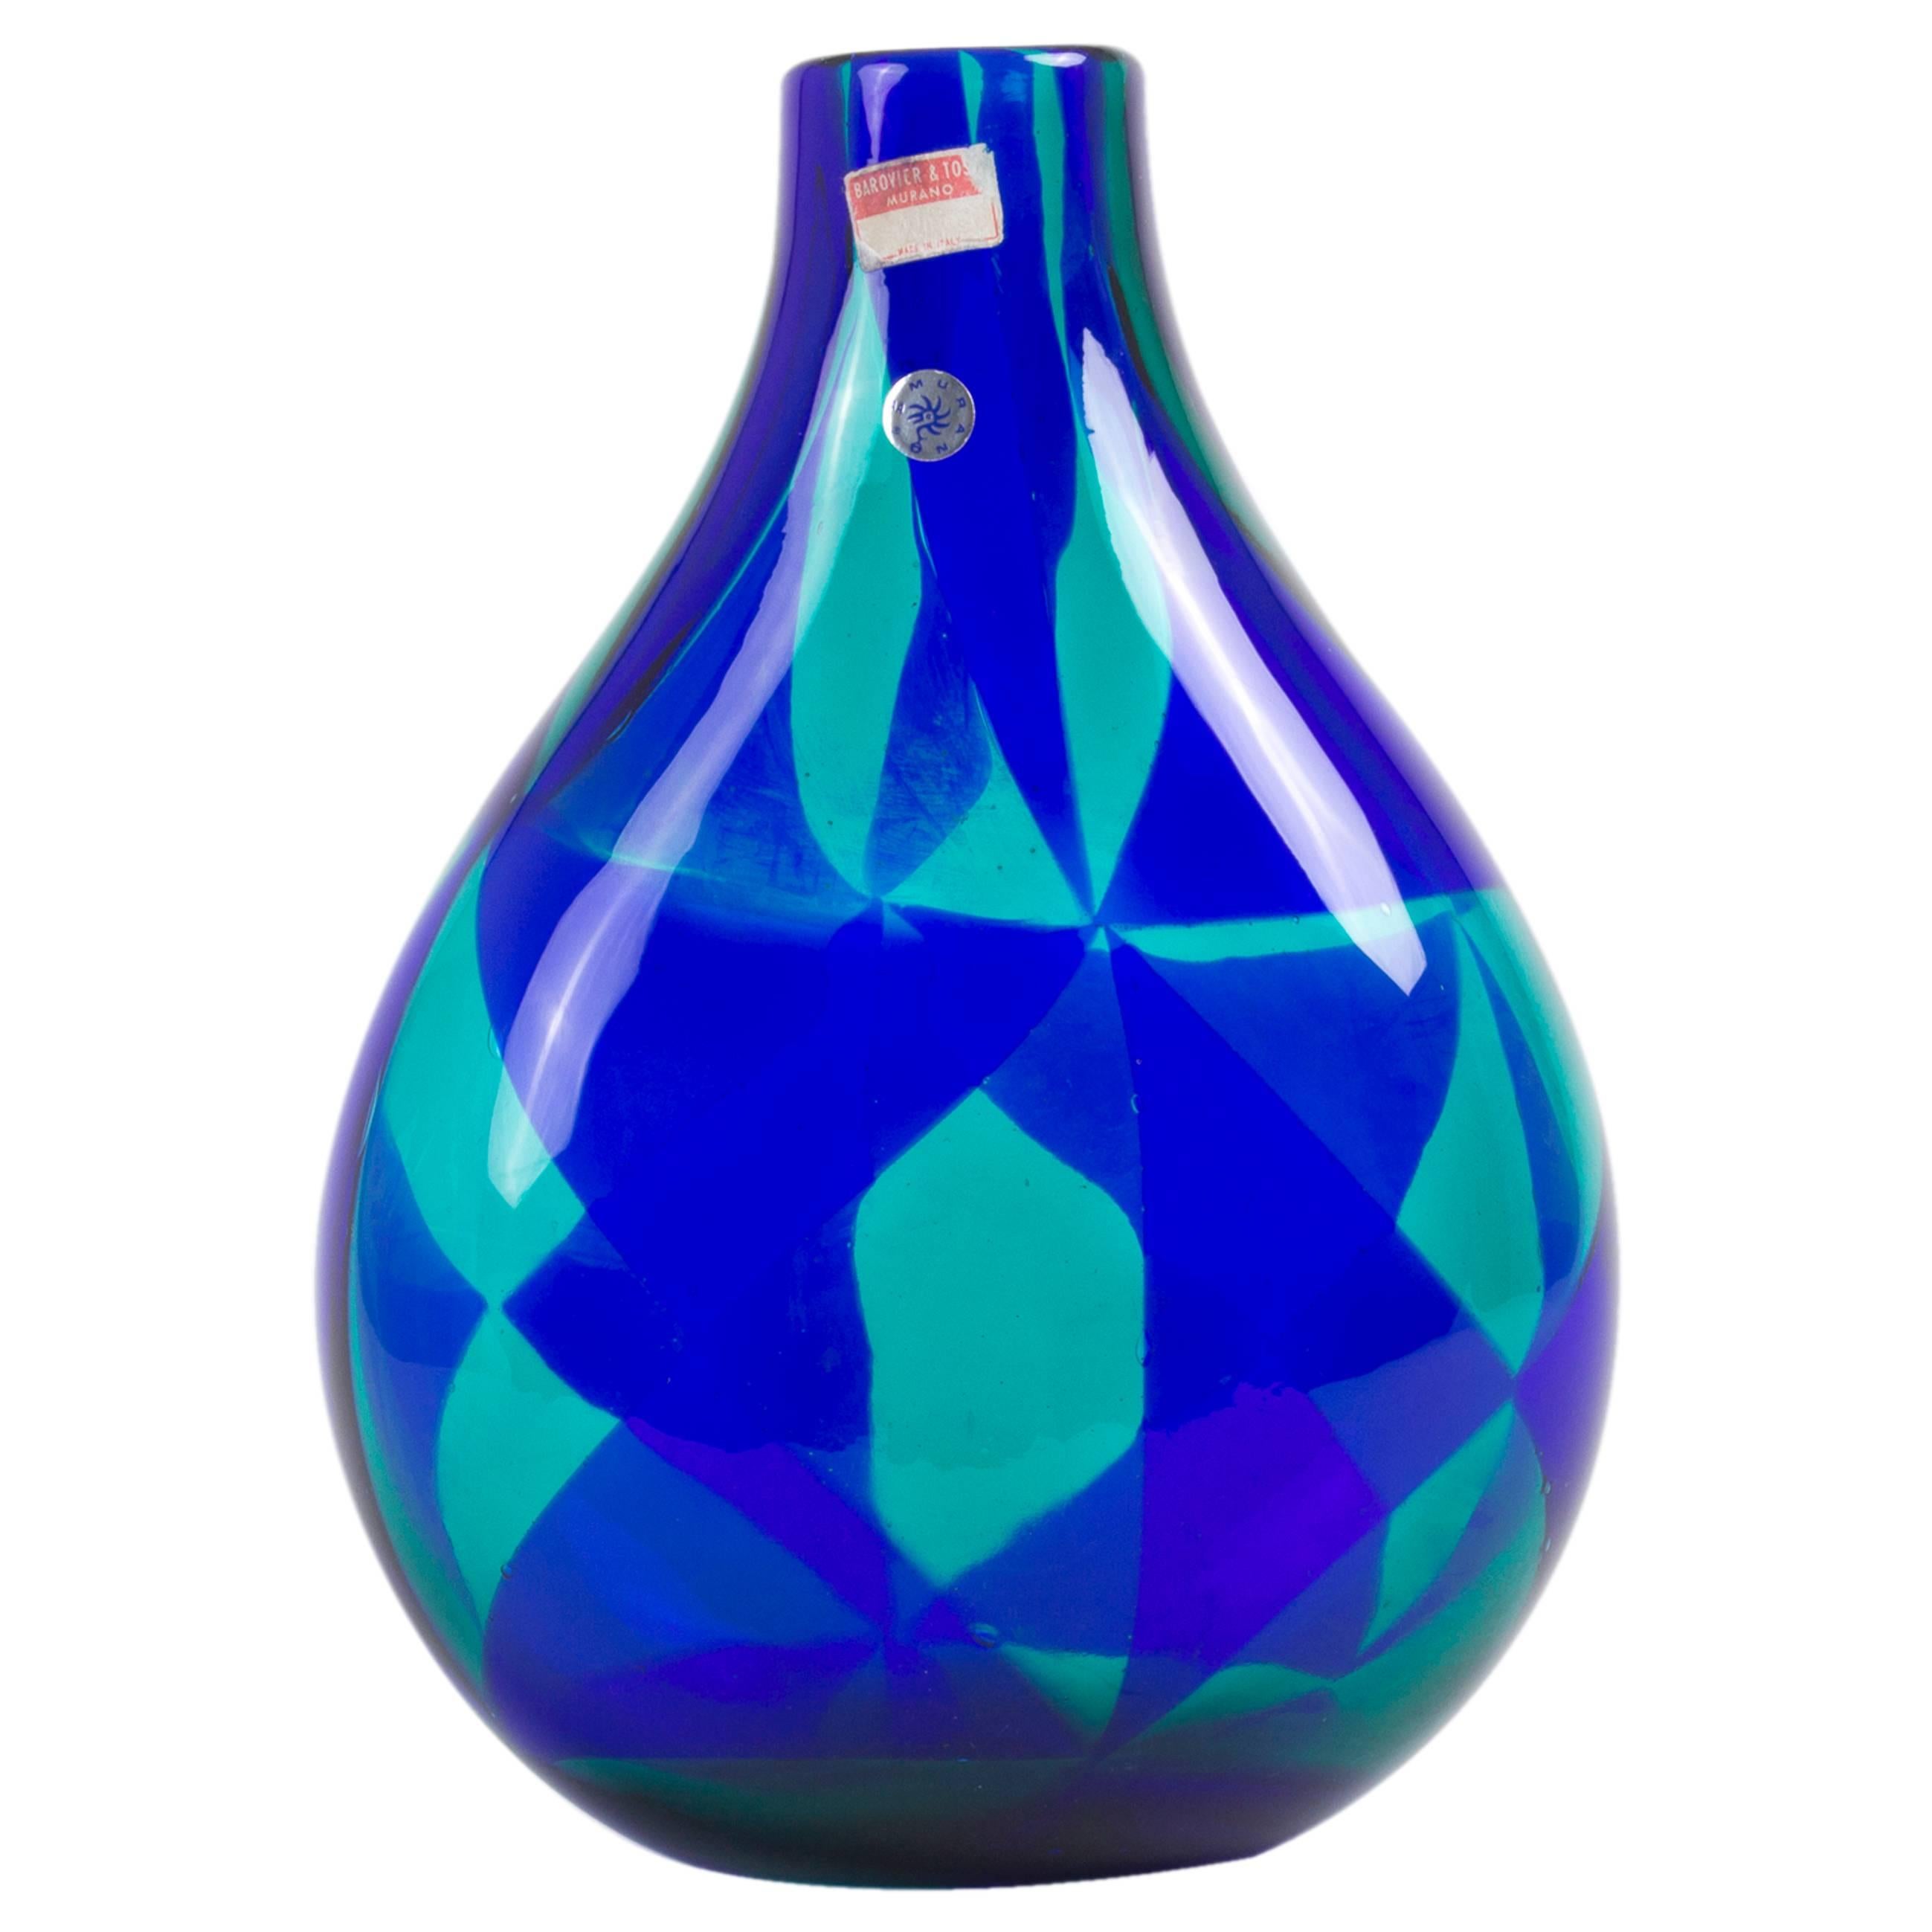 Large 'Intarsio' Murano Vase by Enrcole Barovier for Barovier & Toso, 1960s